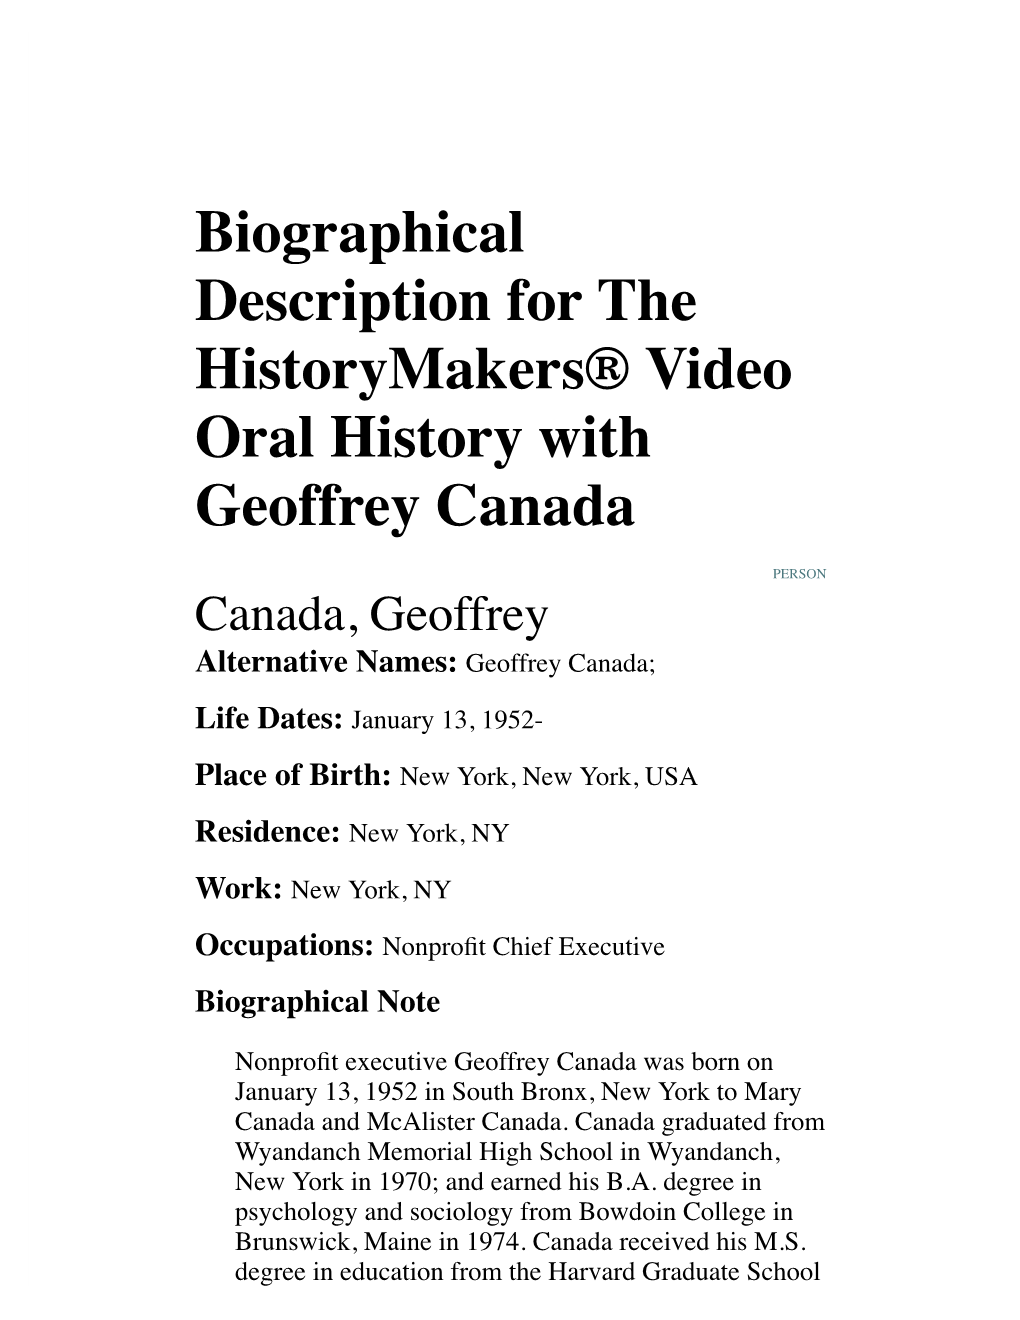 Biographical Description for the Historymakers® Video Oral History with Geoffrey Canada